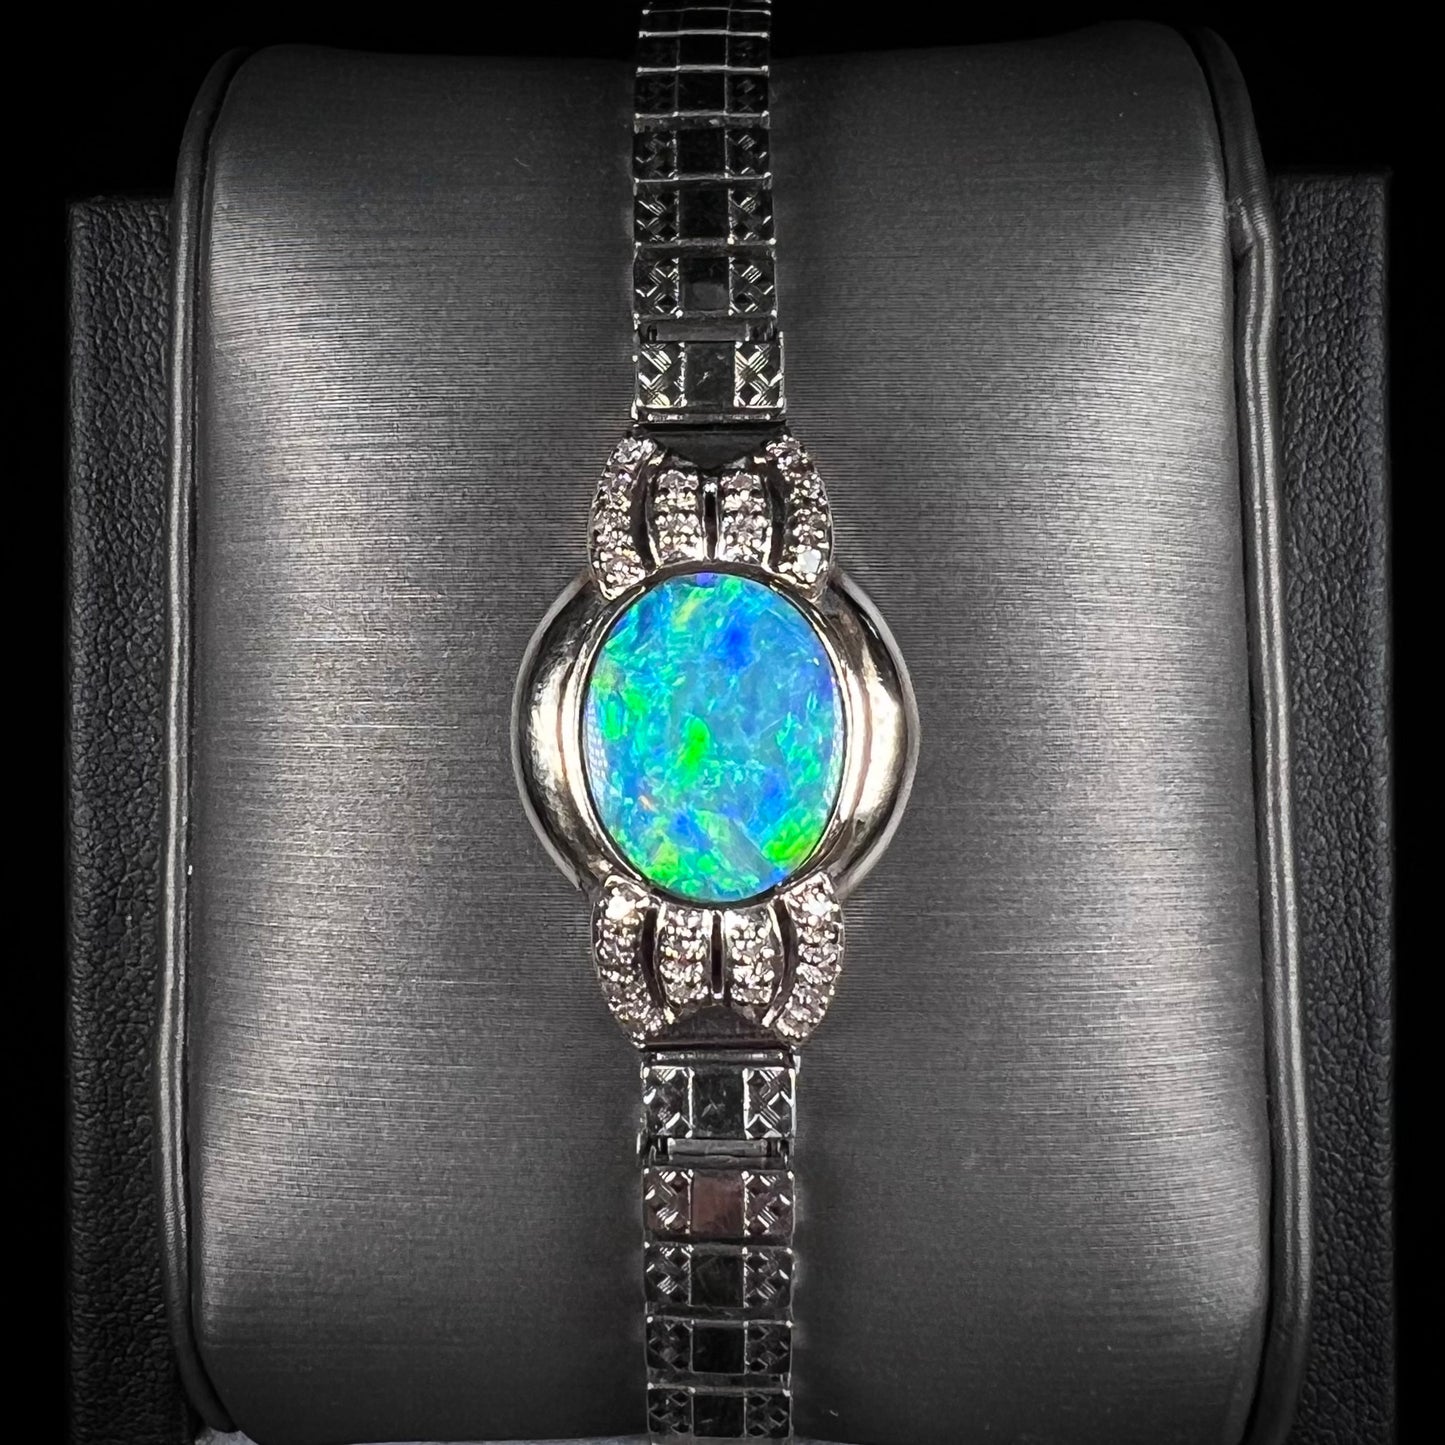 A ladies' art deco style white gold and stainless steel bracelet set with a natural black opal doublet and diamonds.